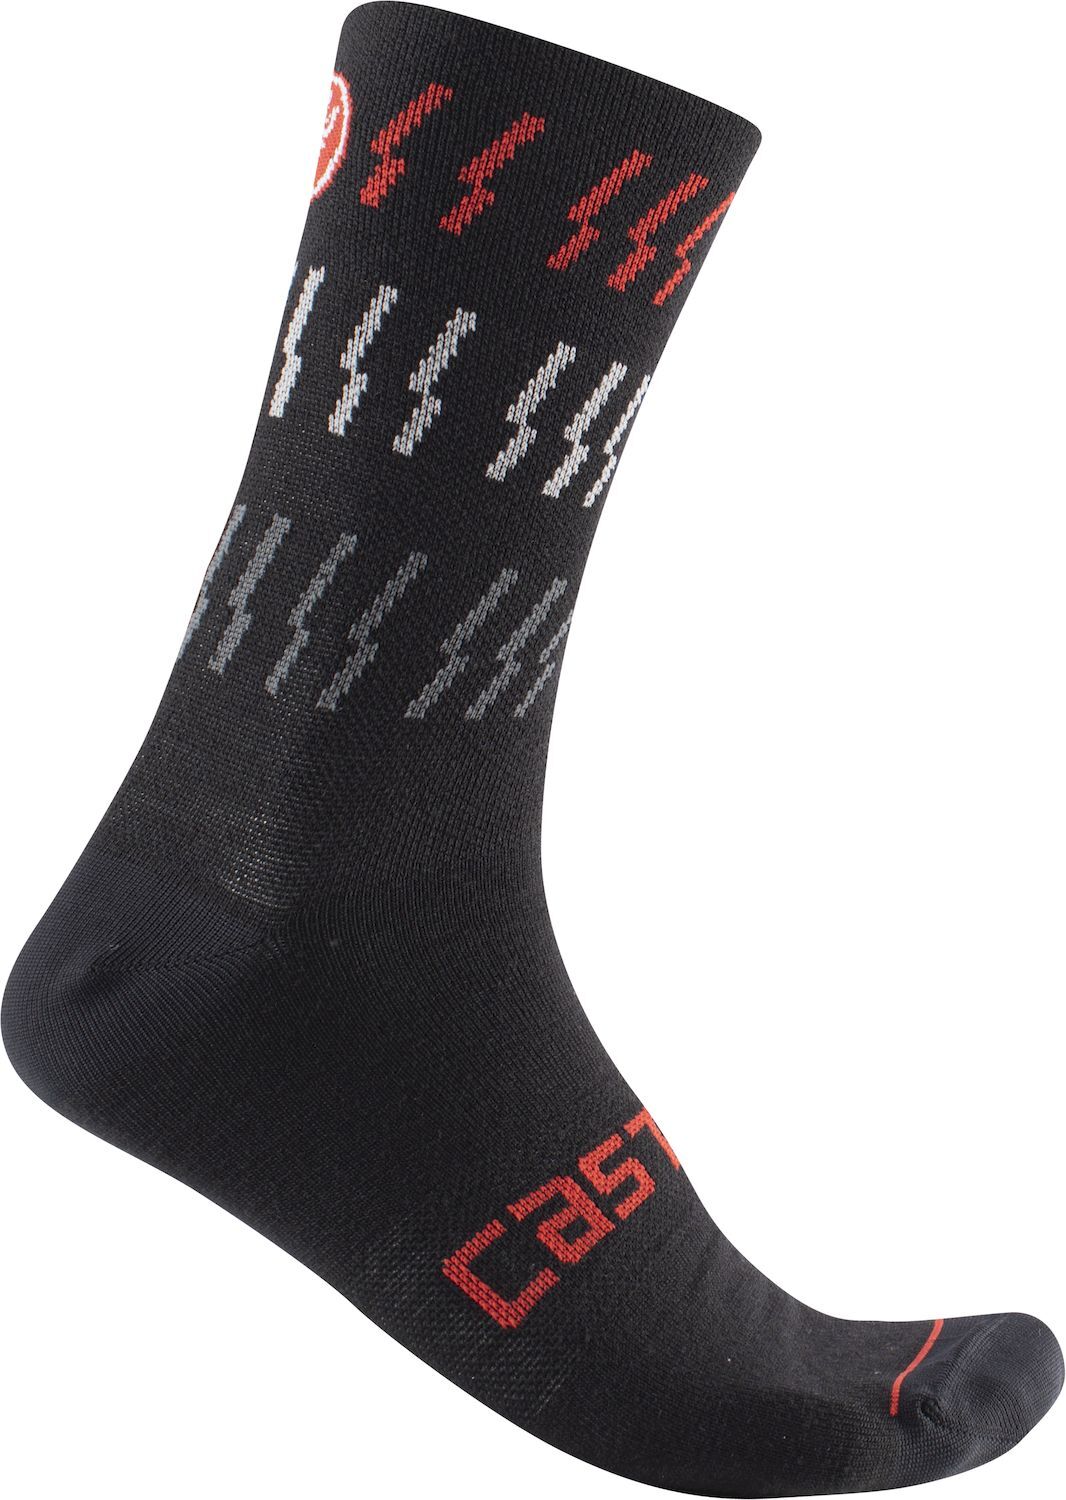 Castelli Mid Winter 18 - Calze ciclismo